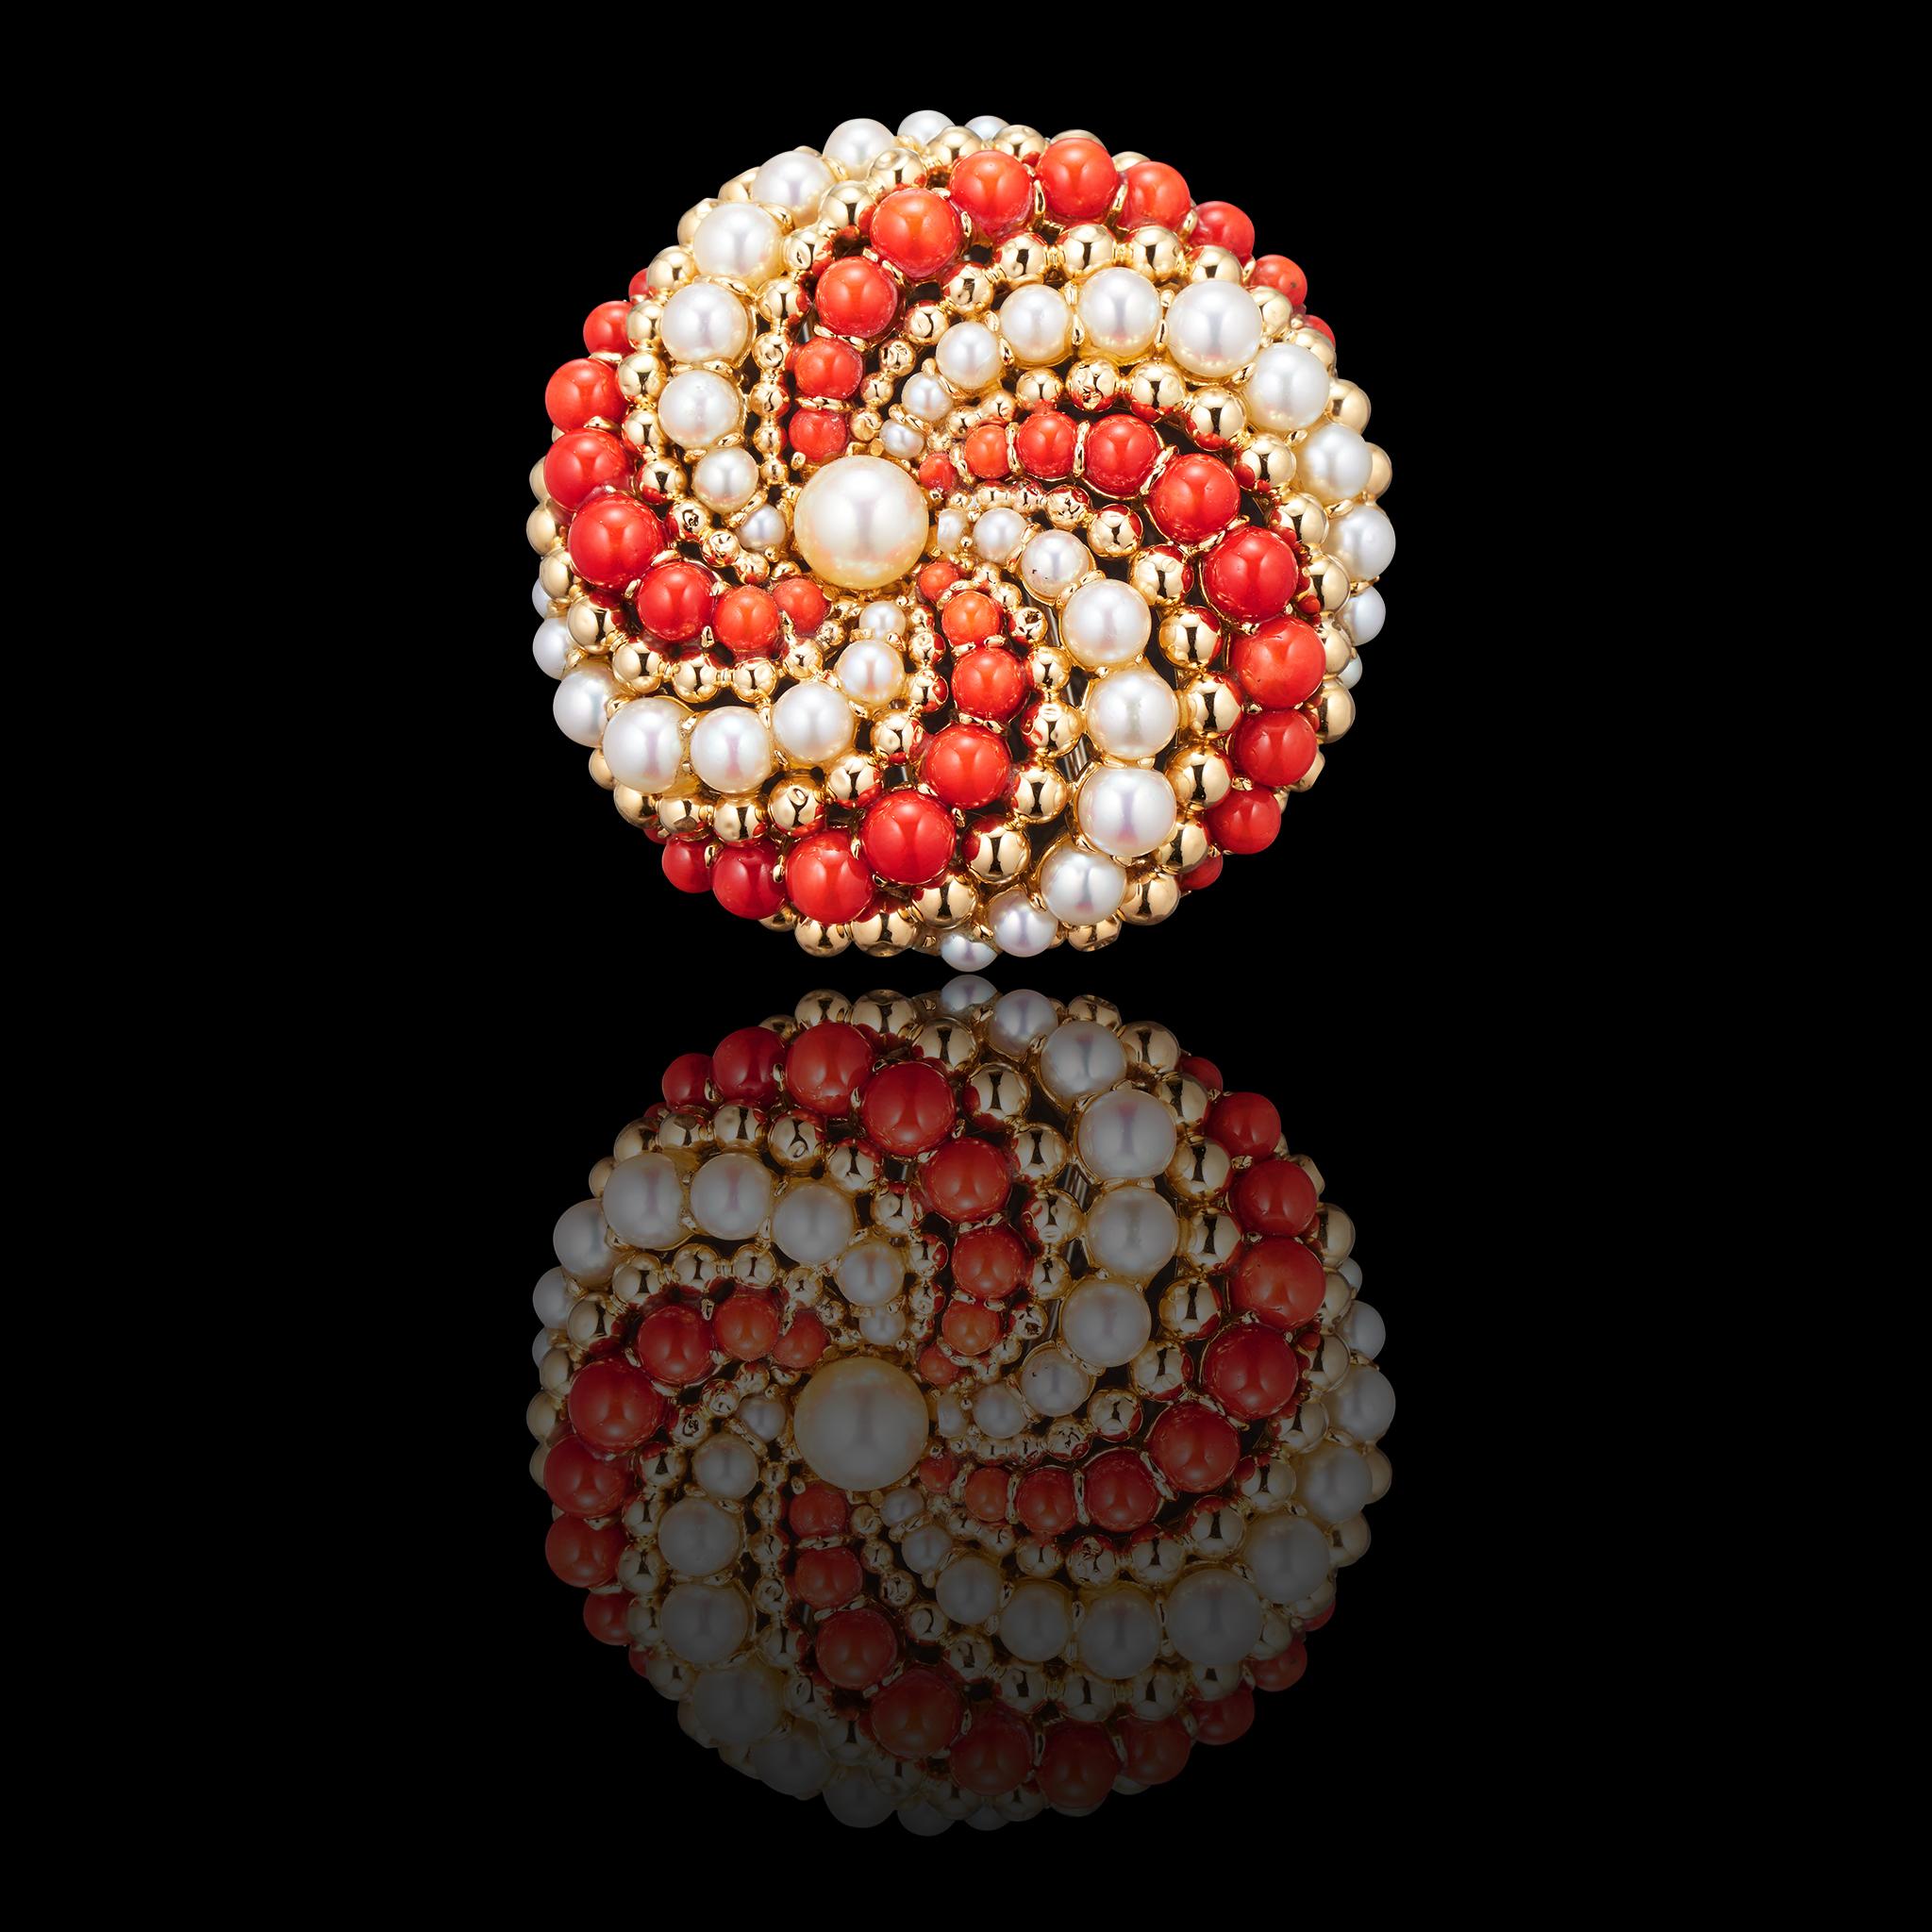 Van Cleef & Arpels 1960s Brooch-Pendant Coral, Pearls and 18 Karat Gold In Excellent Condition For Sale In London, GB